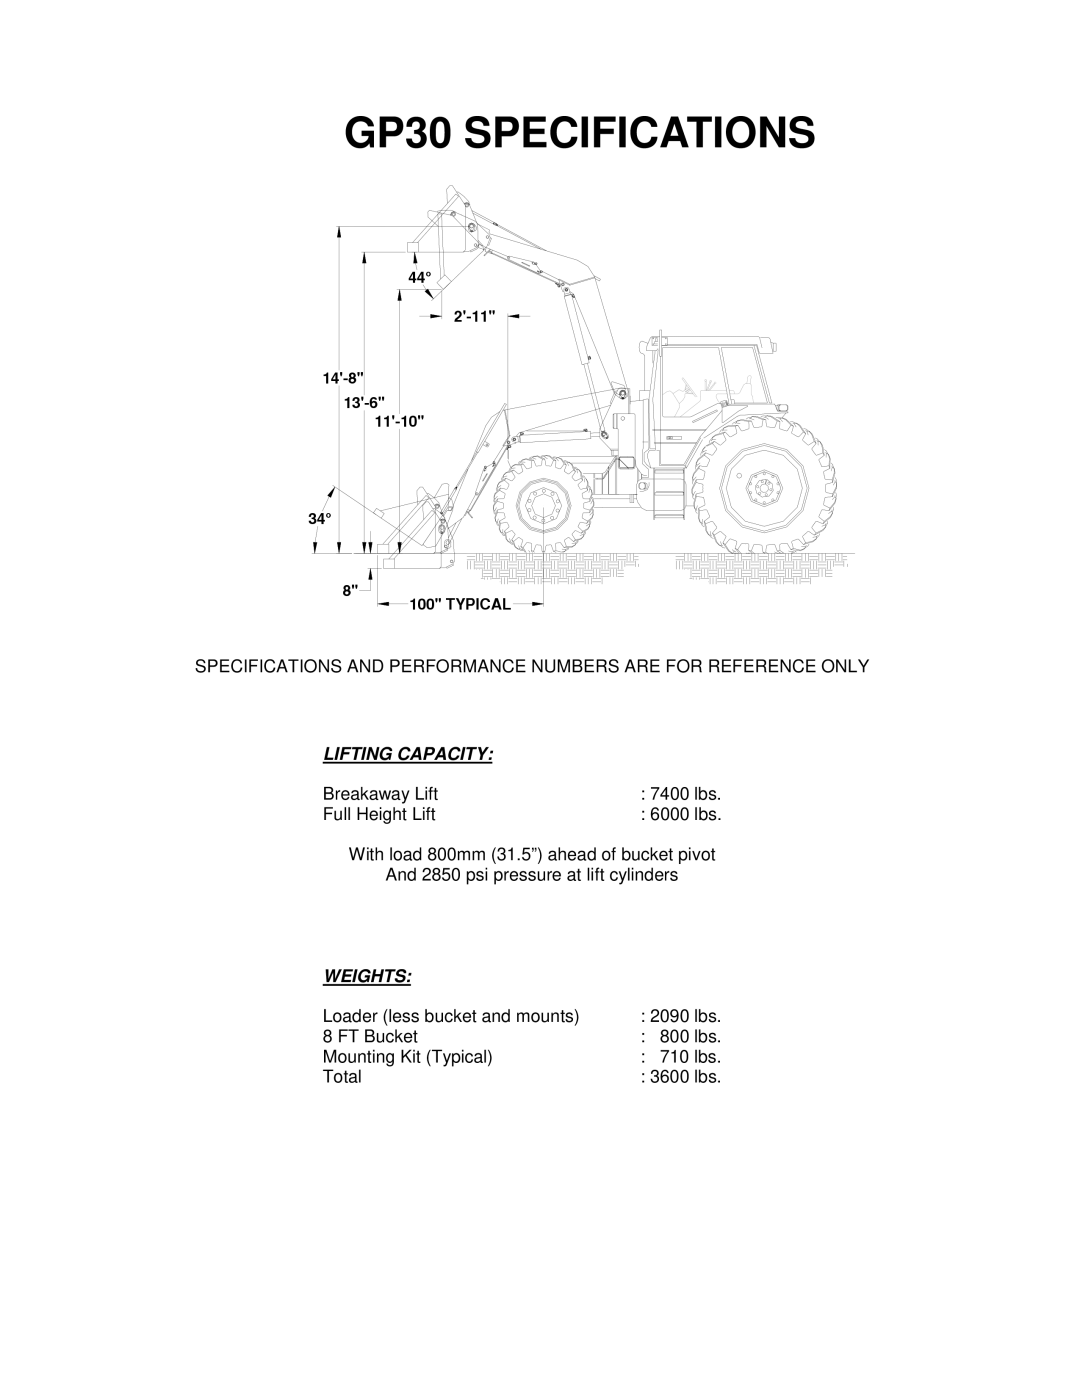 Miller Electric owner manual GP30 SPECIFICATIONS, Lifting Capacity, Weights 